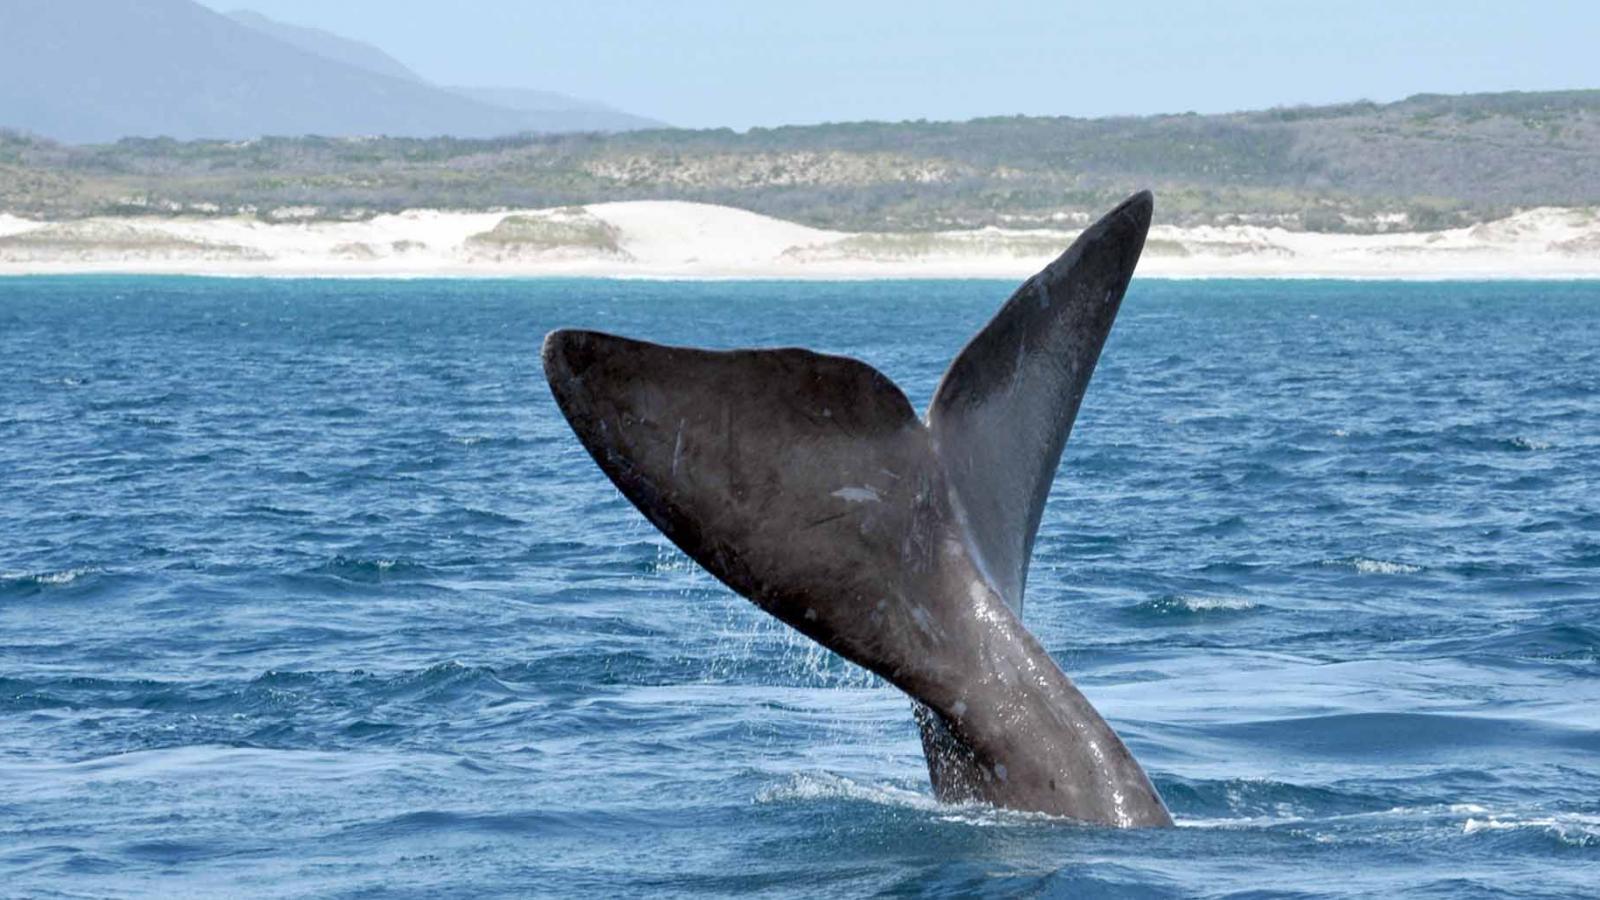 Seeing the southern right whales in South Africa